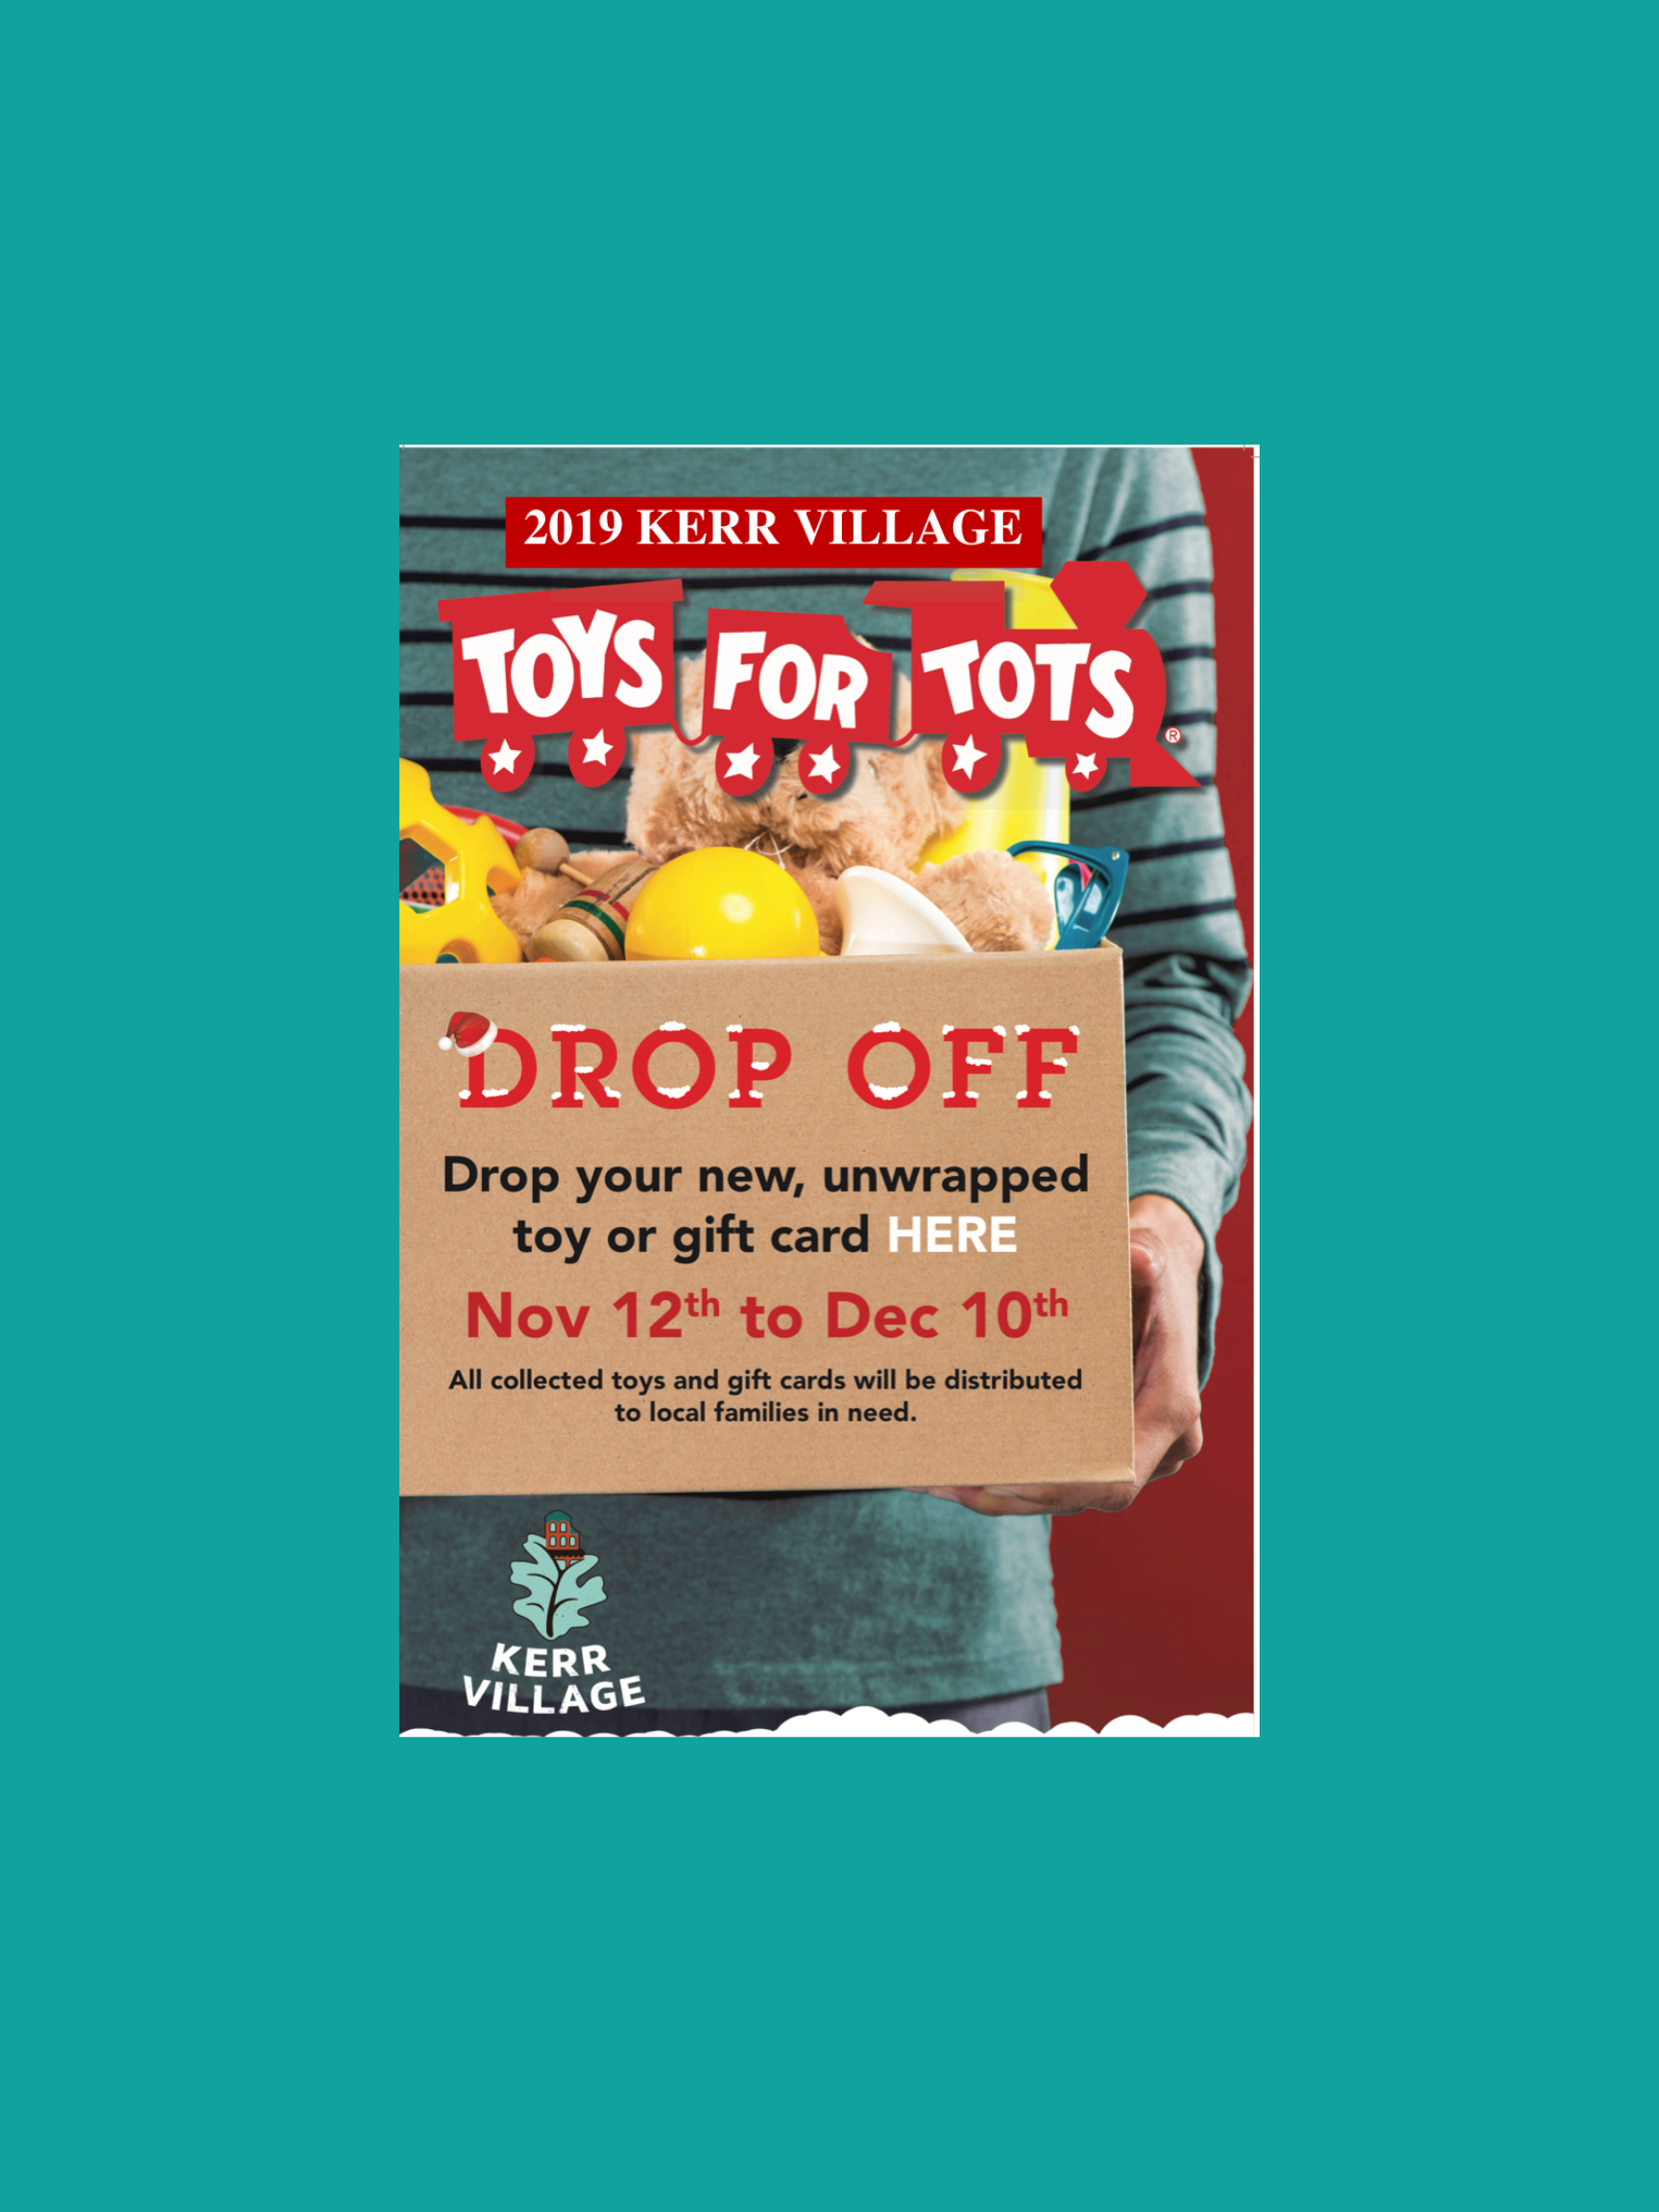 Toys For Tots Campaign in The Kerr Village BIA 2019